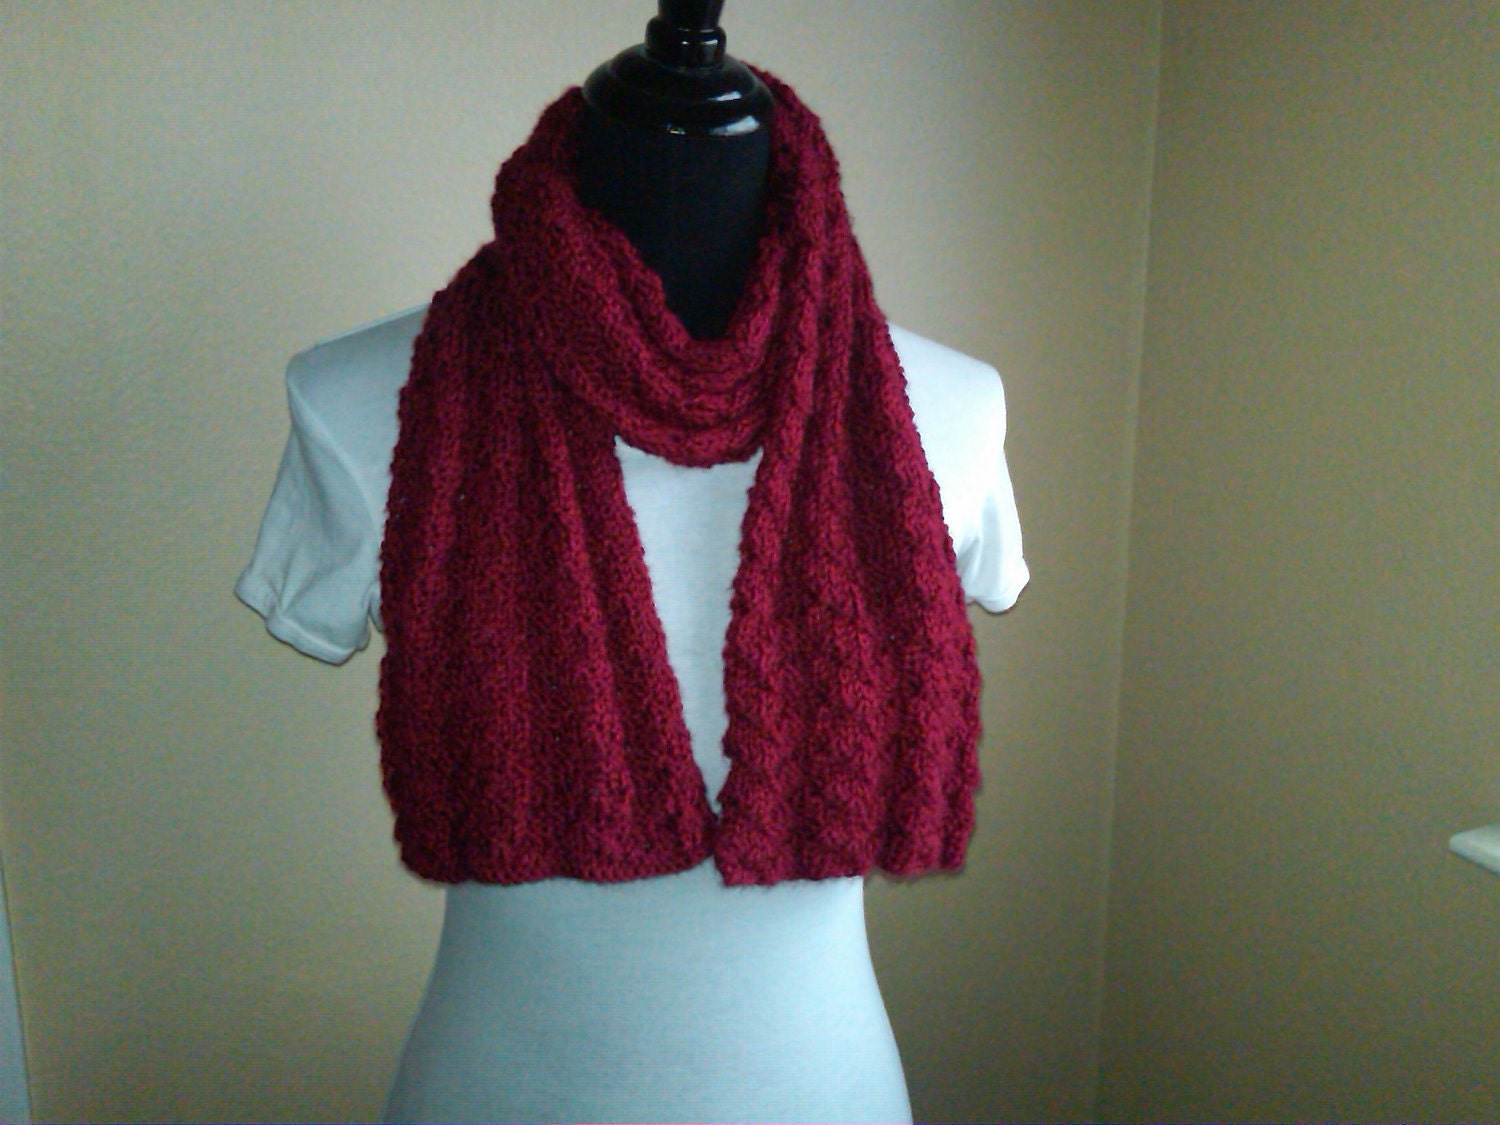 Simply Autumn Red - a handknit scarf